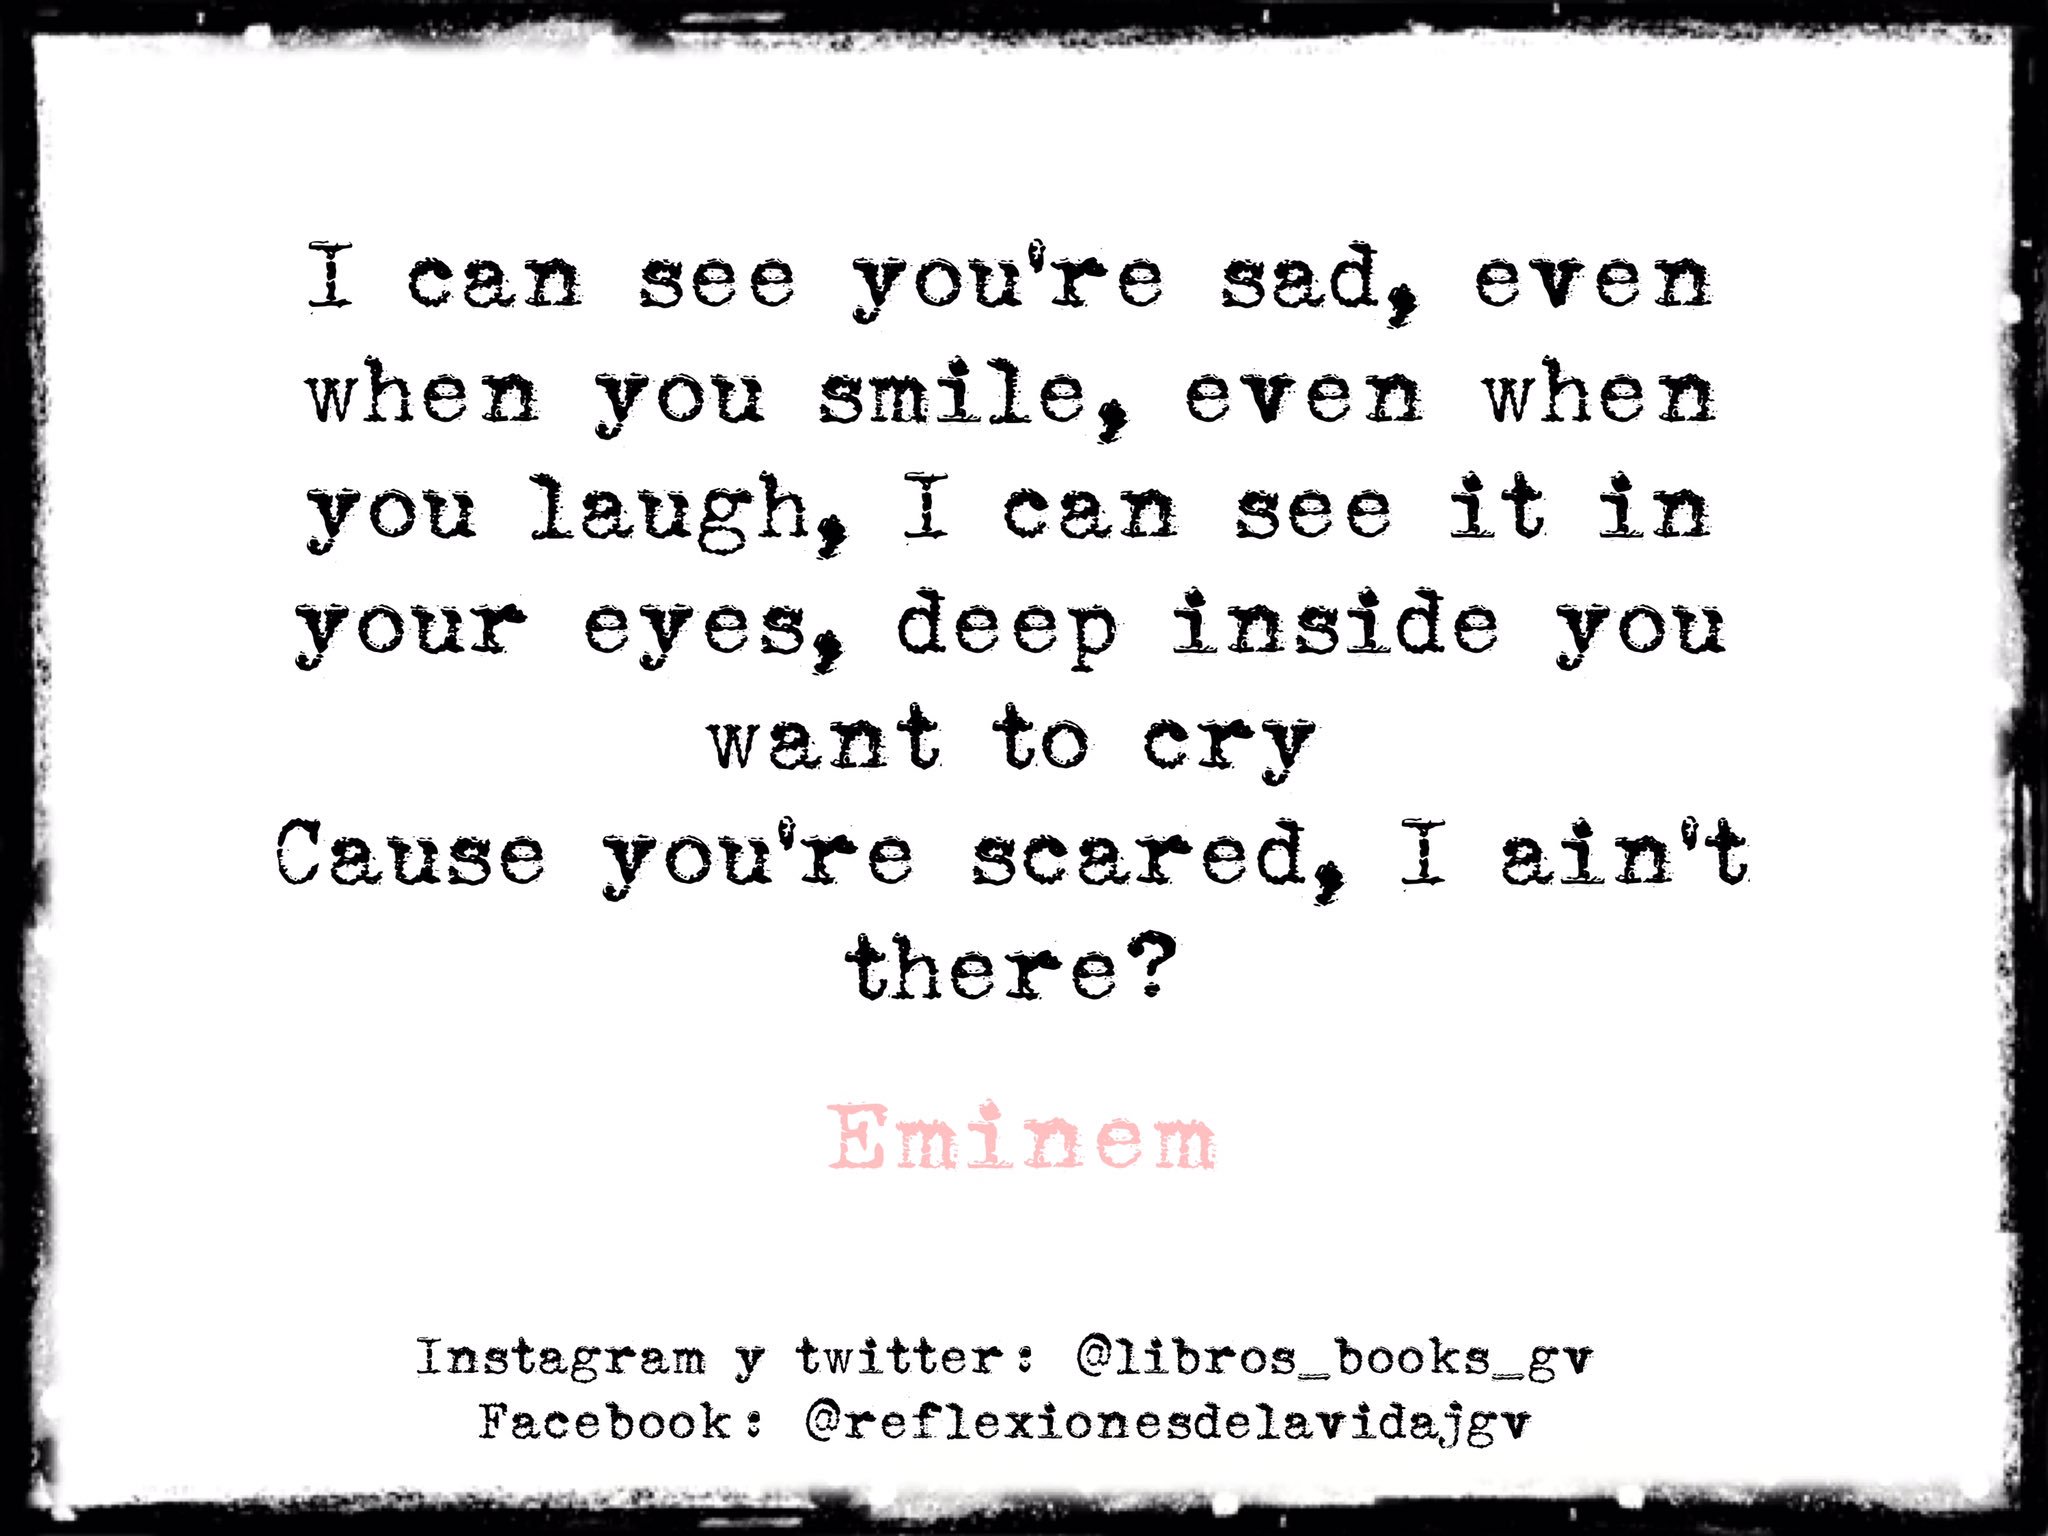 libros_books_gv on X: Part of the song “Mockingbird ” by @Eminem